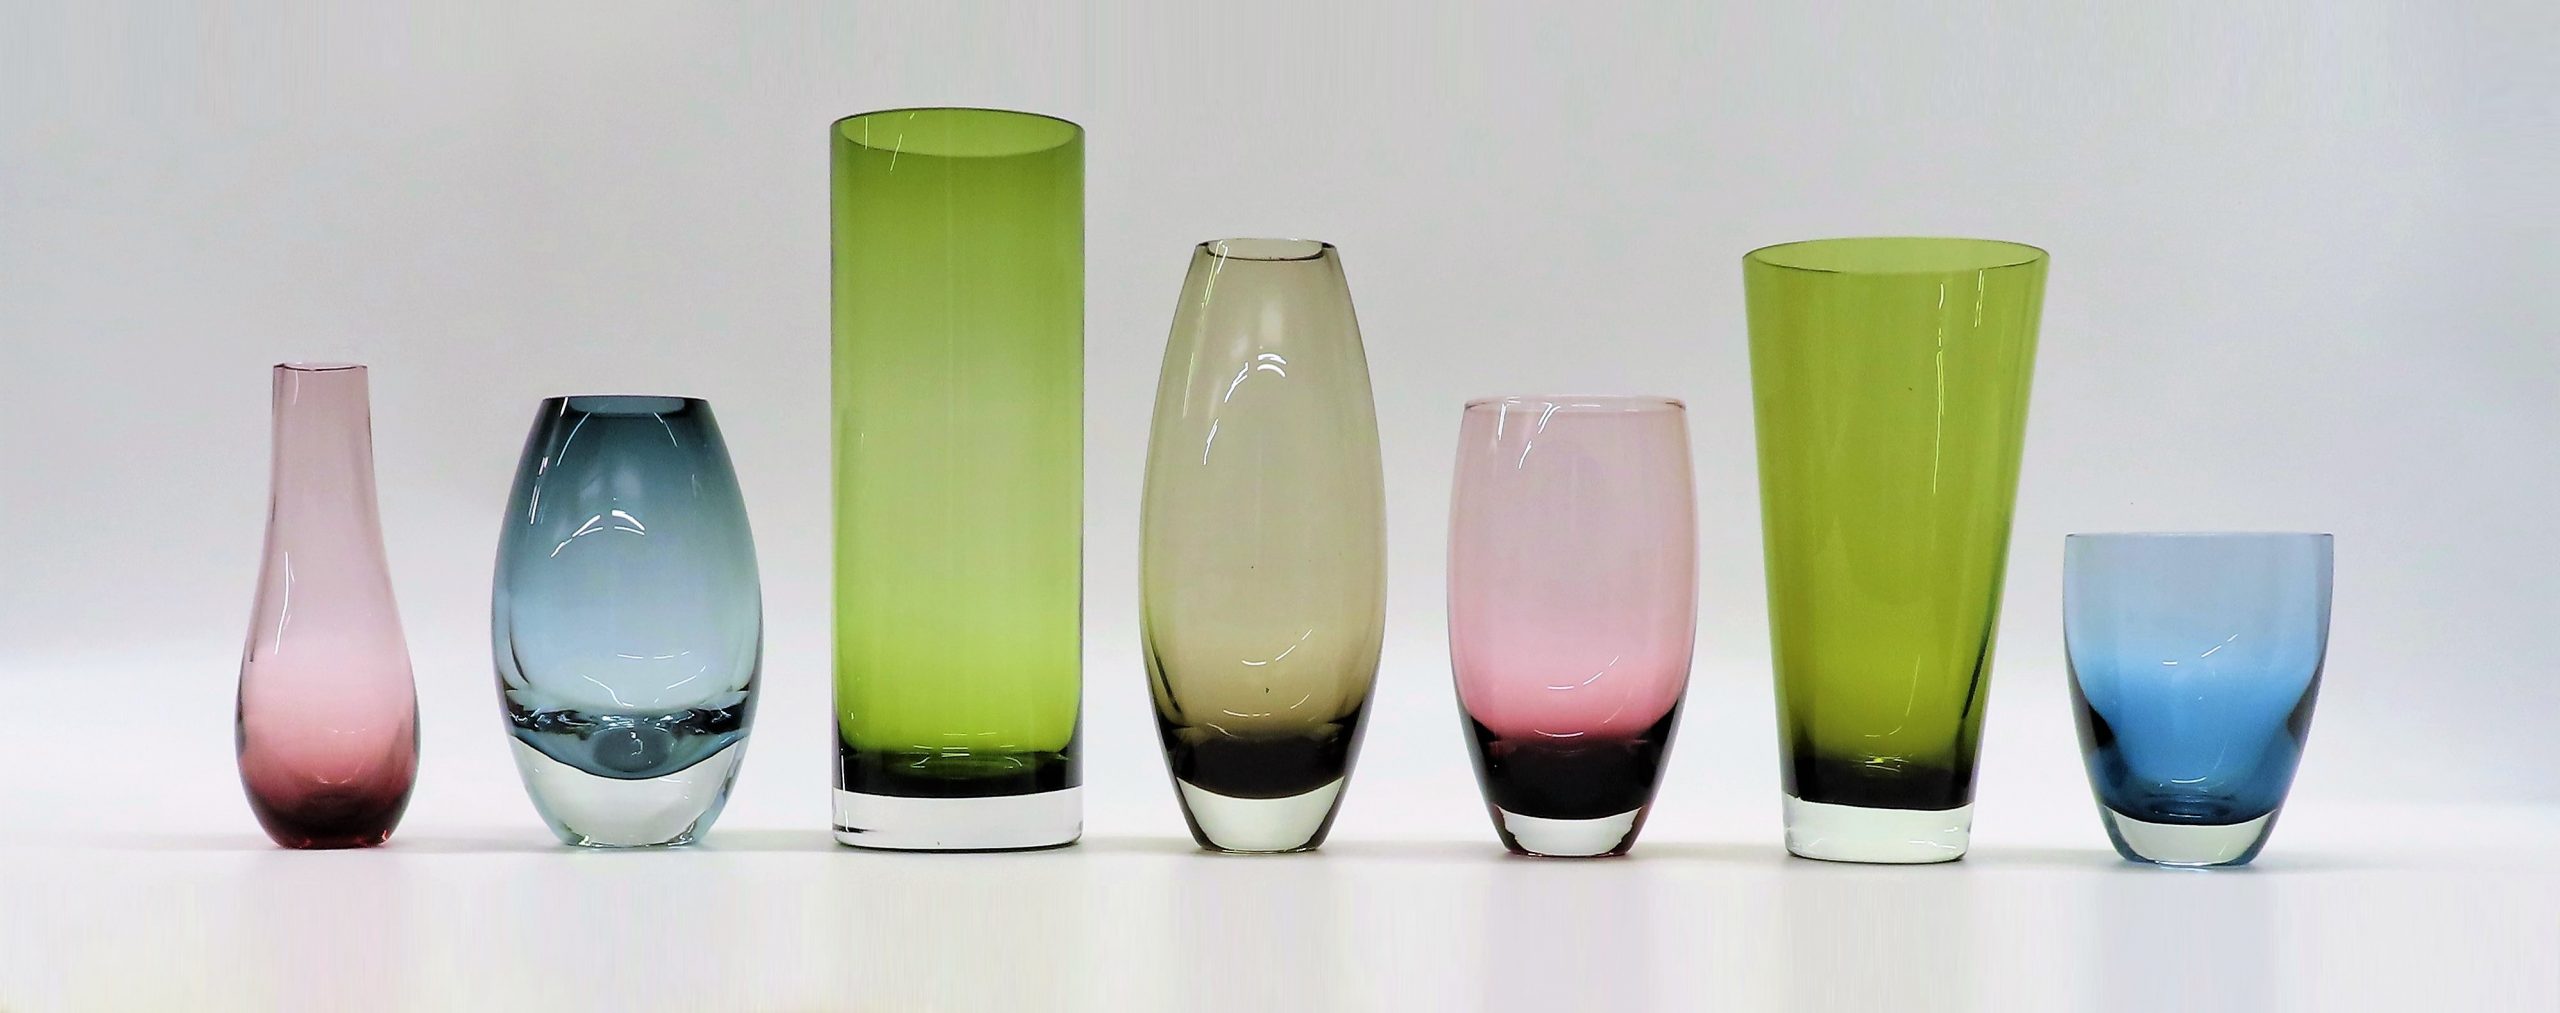 7 vases of different shapes and colours by Caithness Glass, 1960s